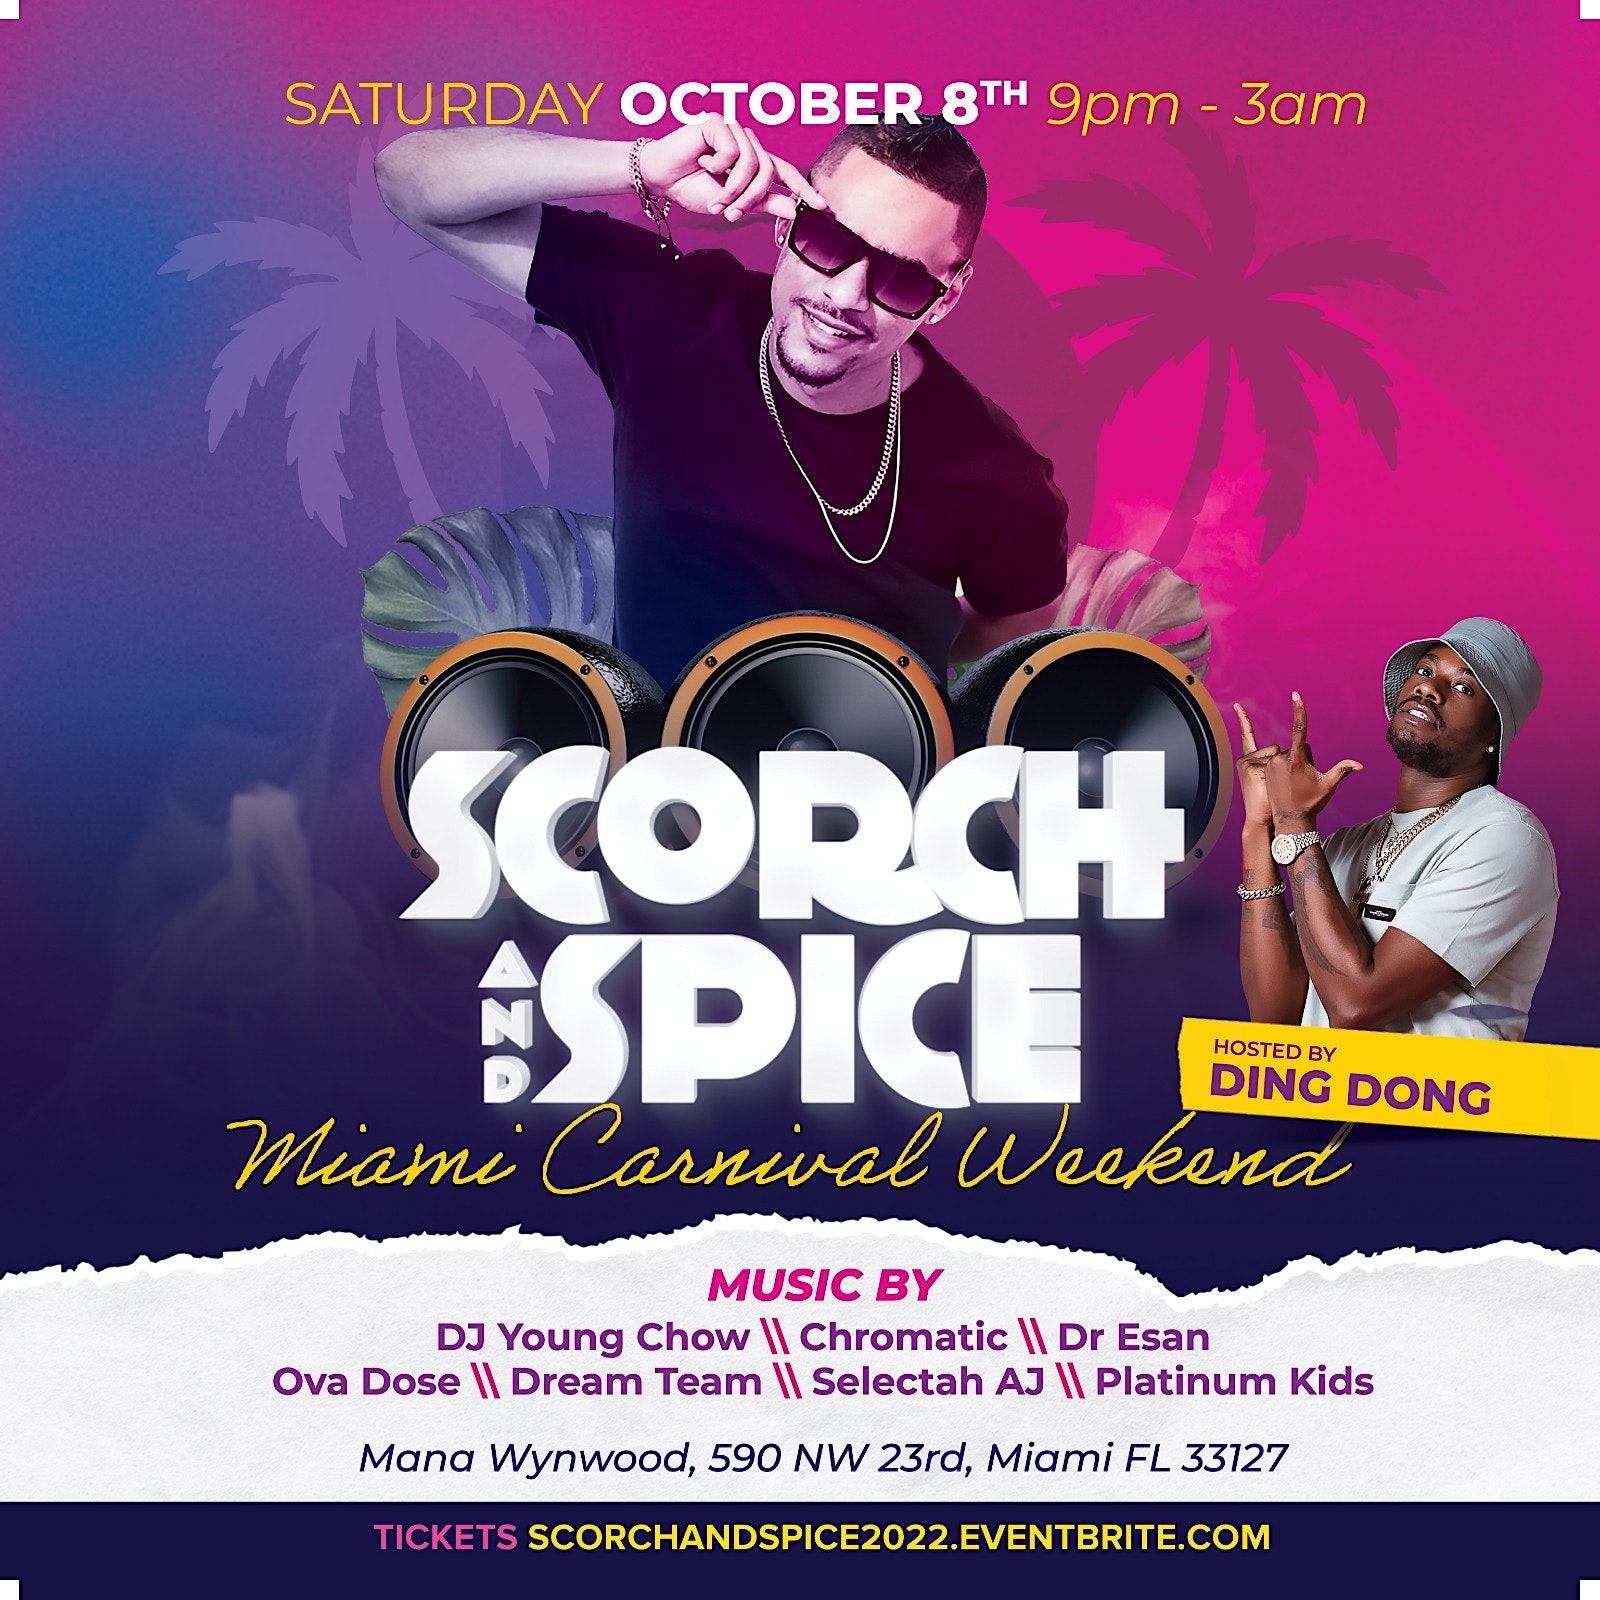 SCORCH + SPICE MIAMI CARNIVAL WhyiParty